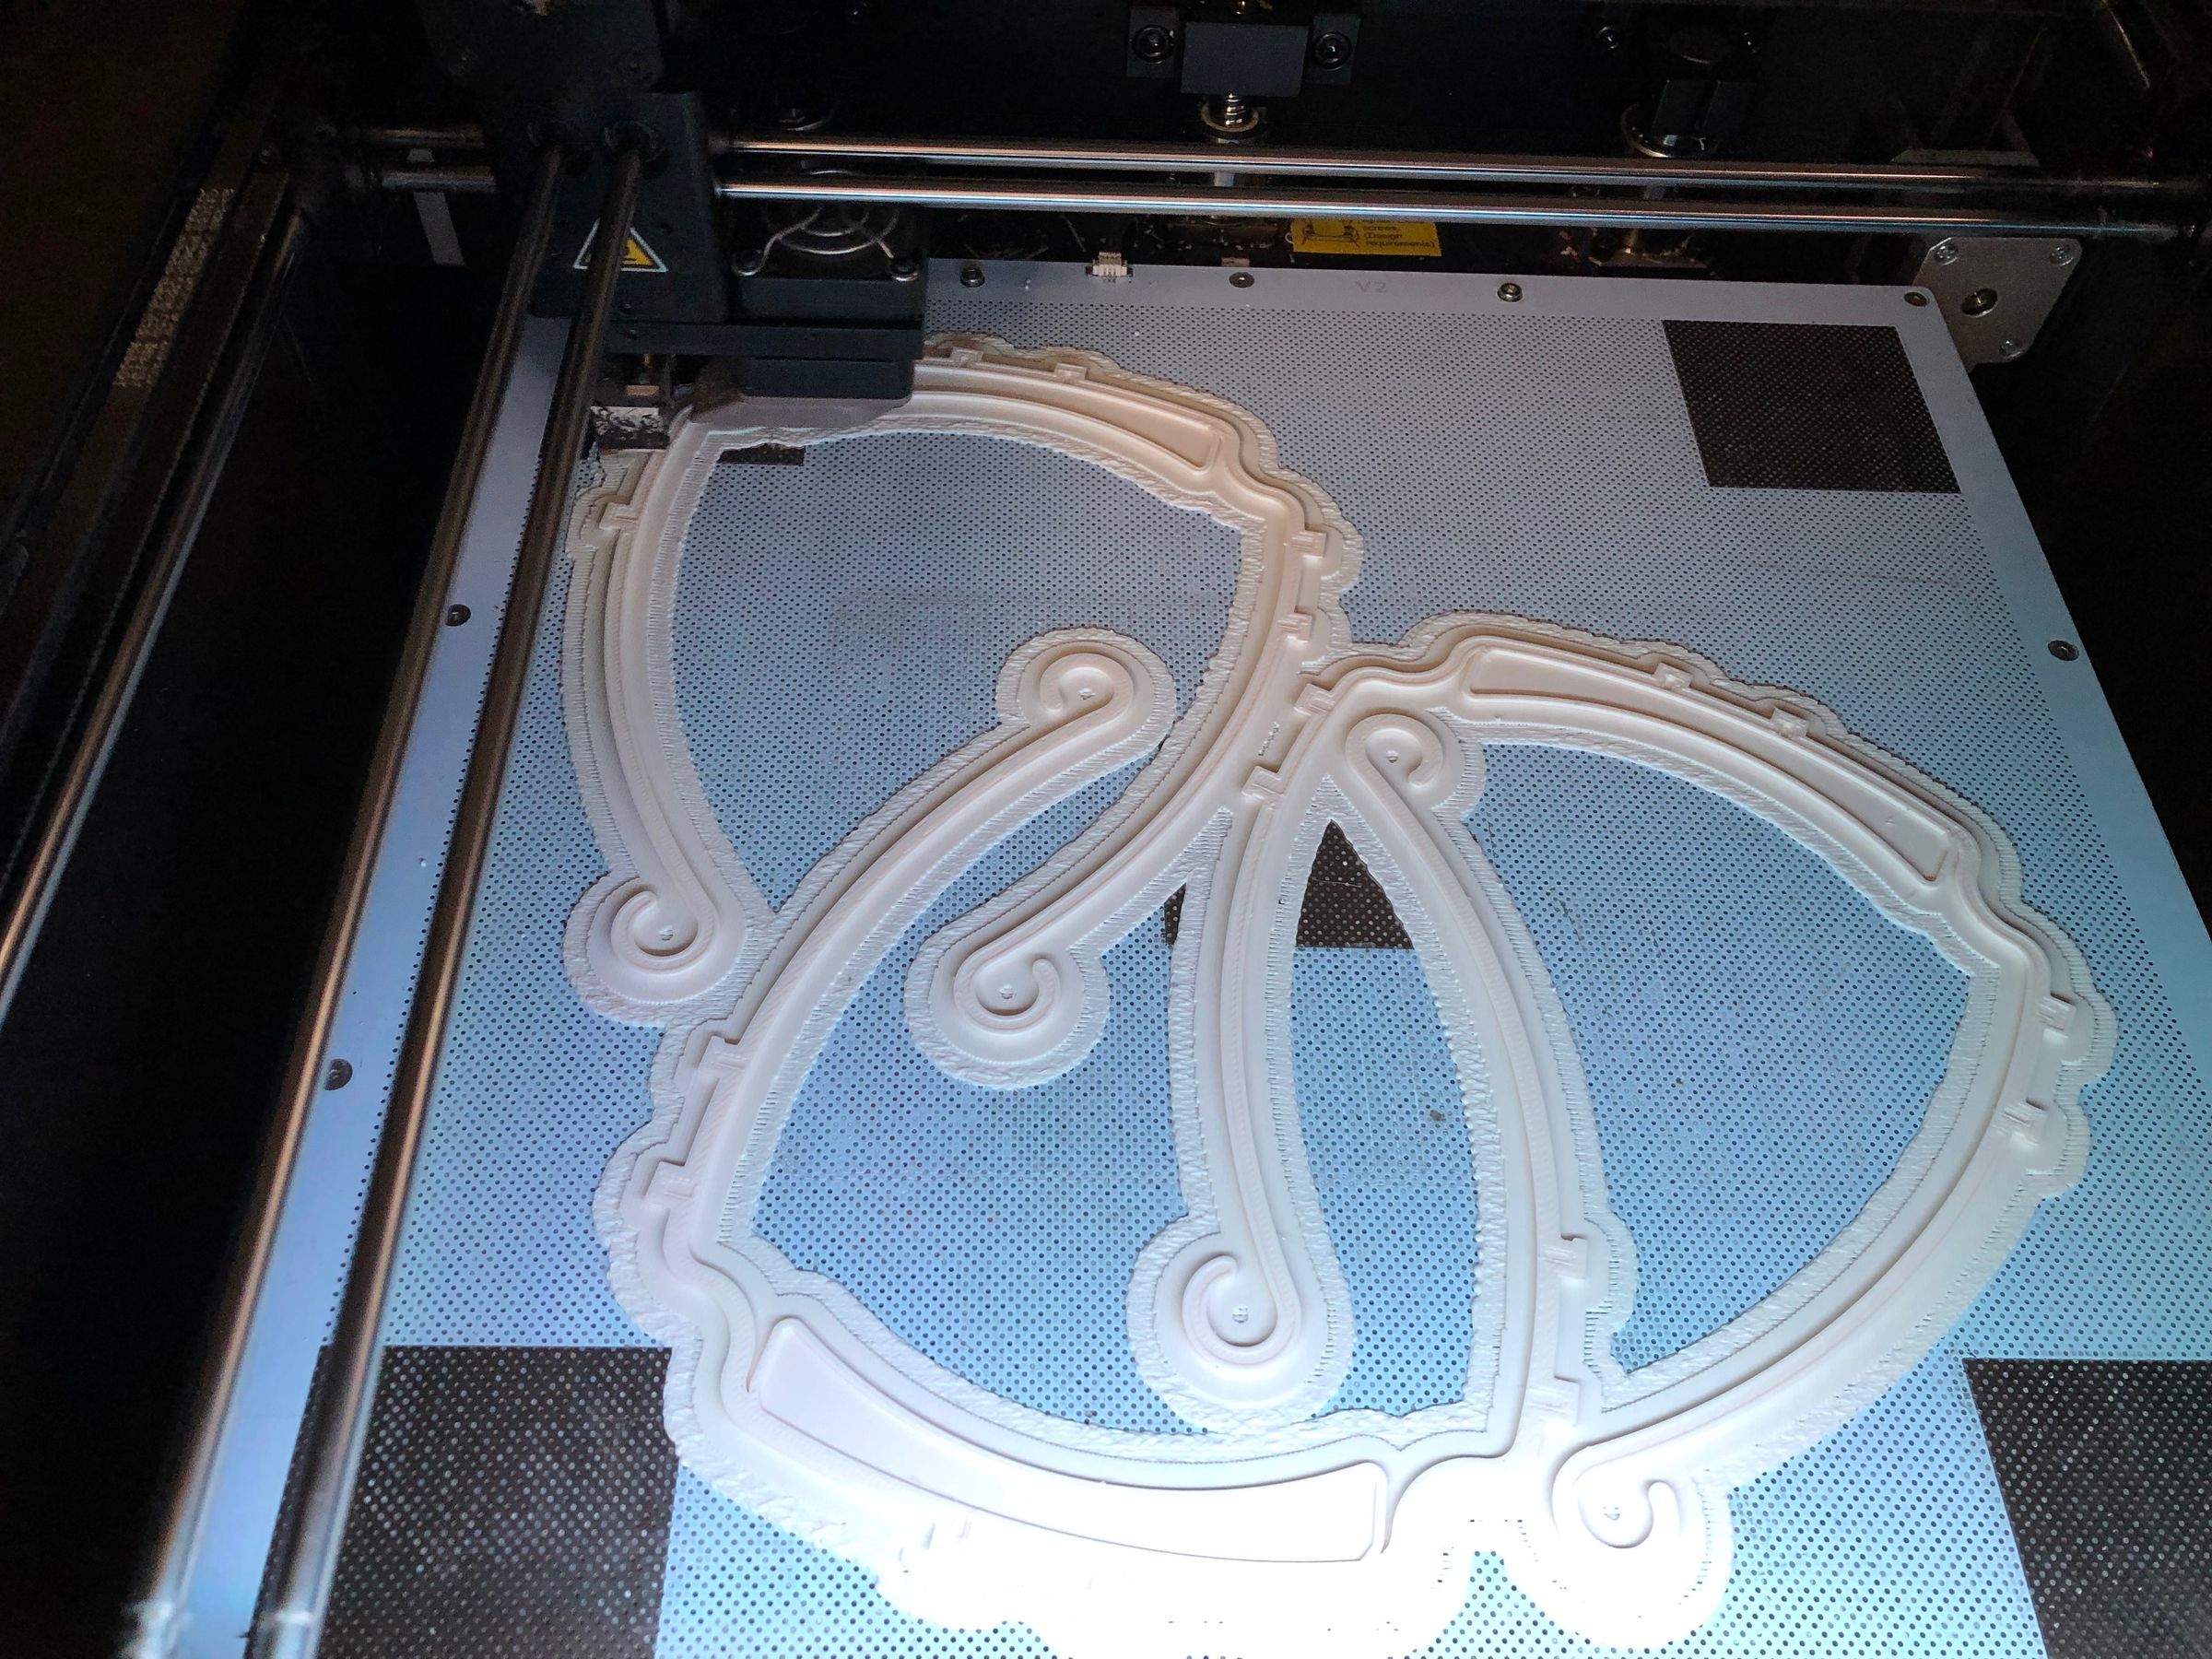 Visor parts being printed as part of the Cornell project